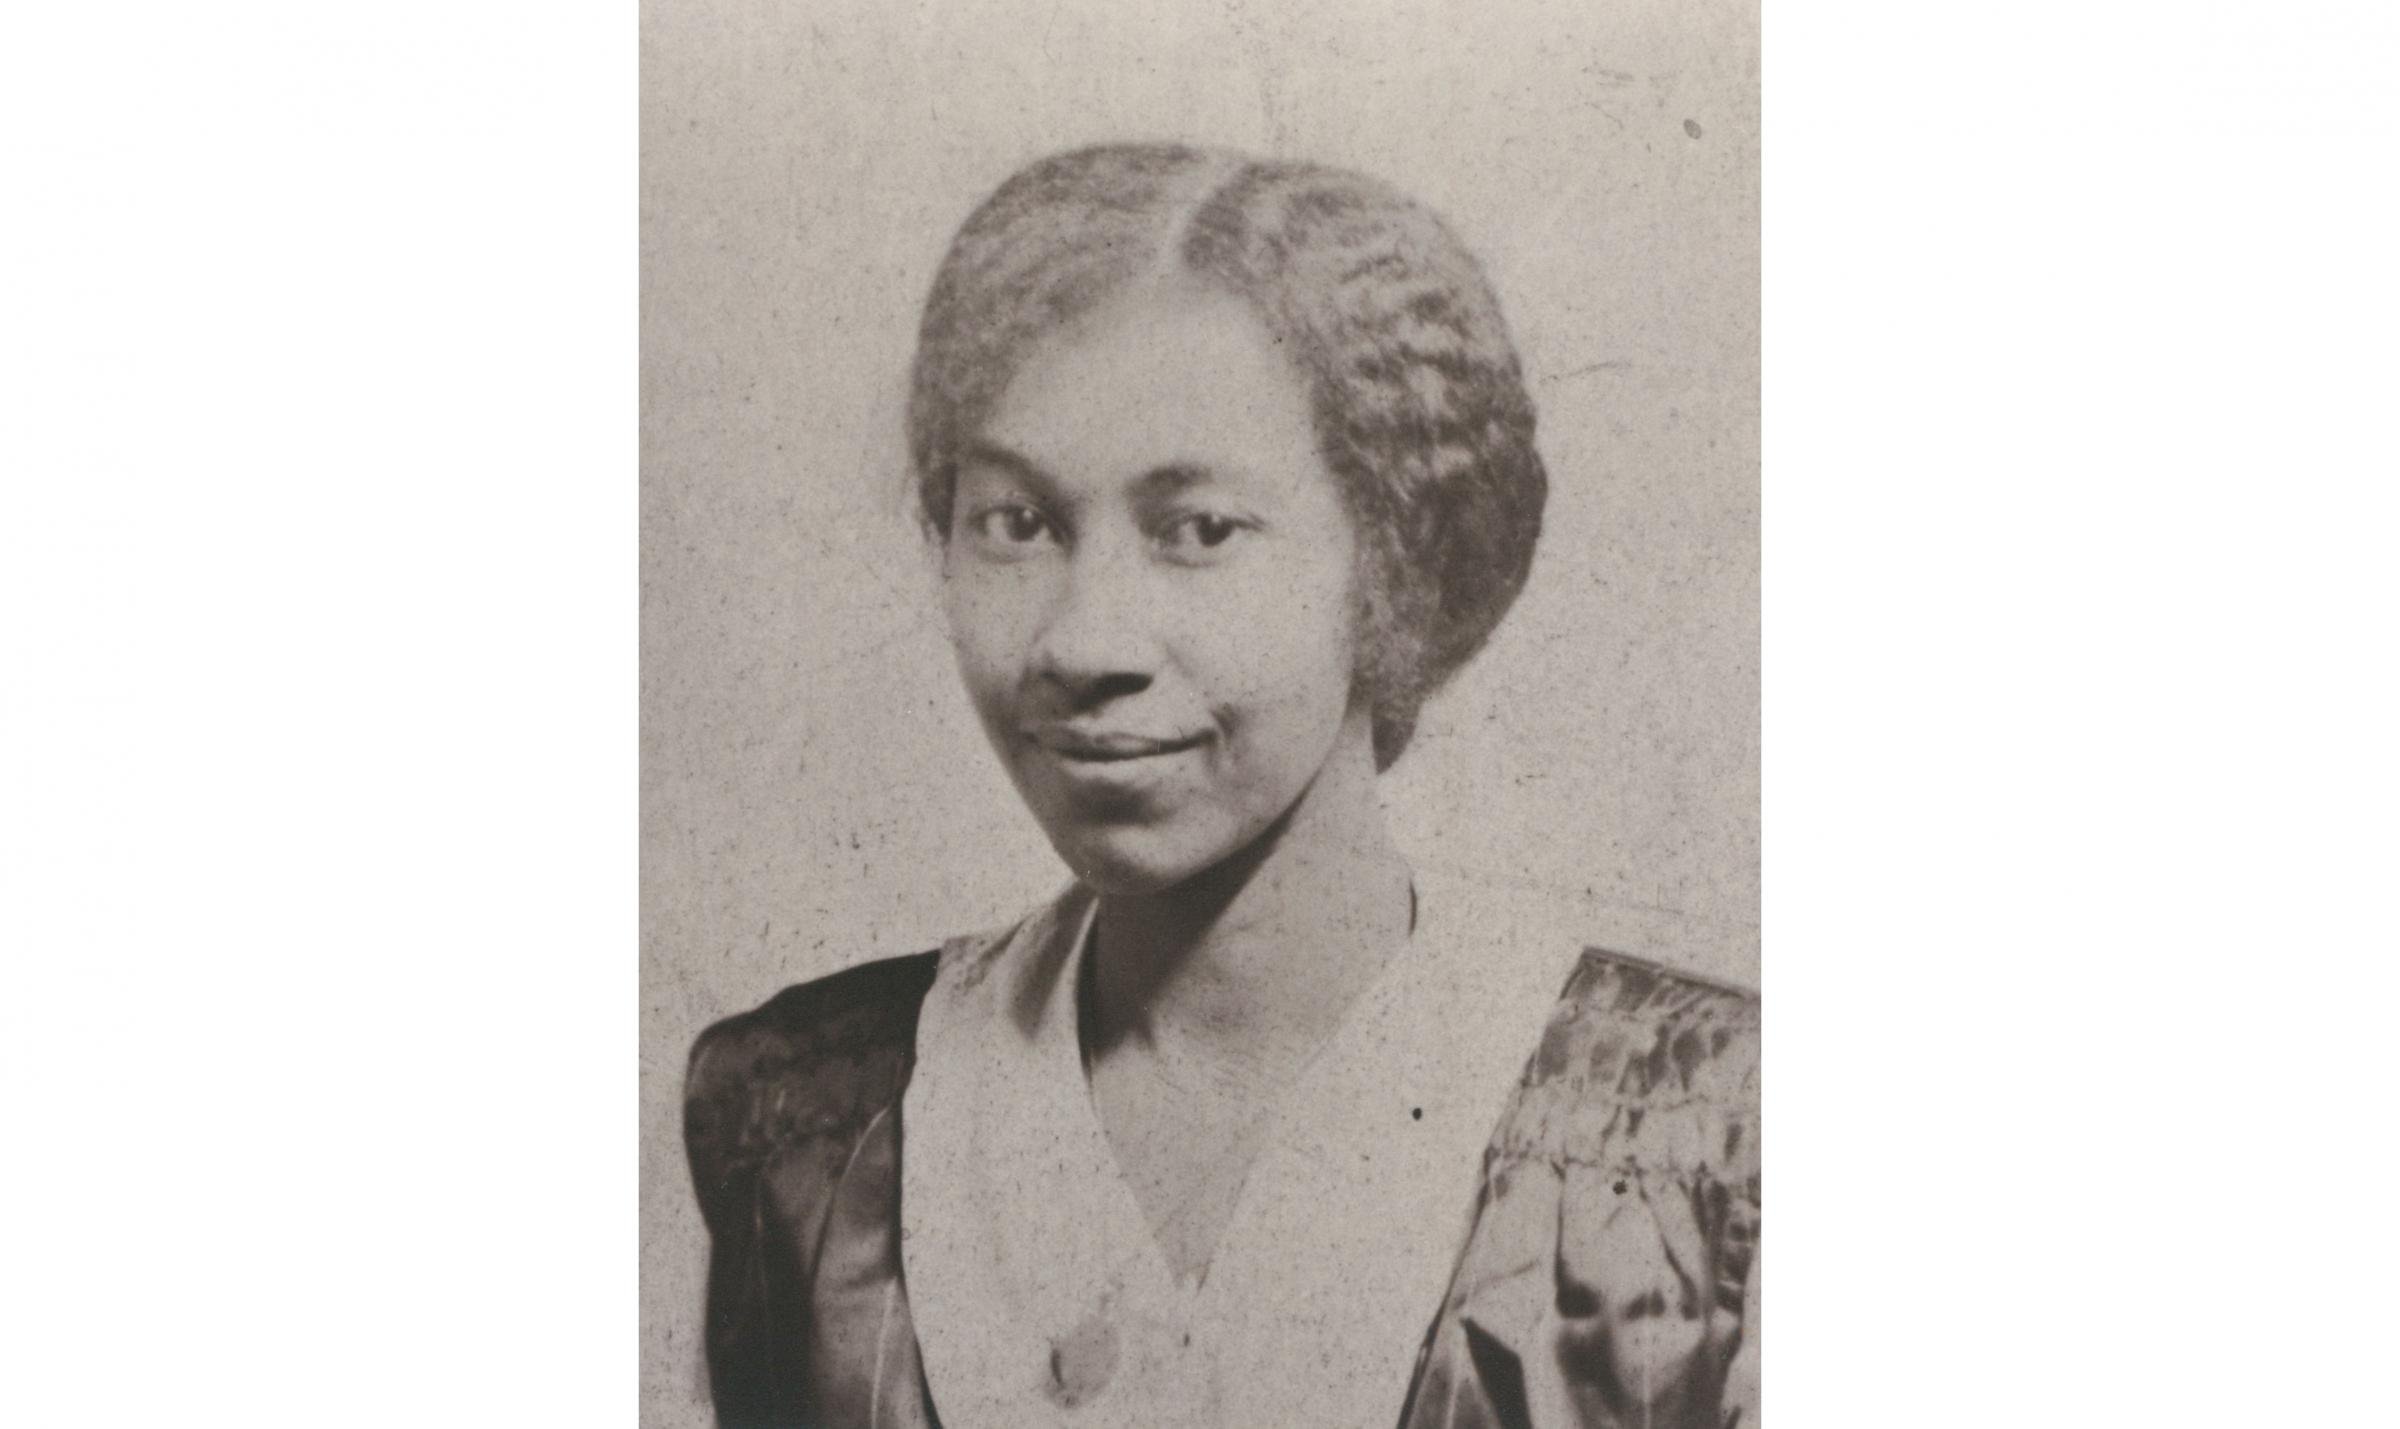 Portrait of a young Black woman with her hair parted down the middle and pulled back. She is wearing a black and white dress and is looking at the camera with a closed-mouth smile.